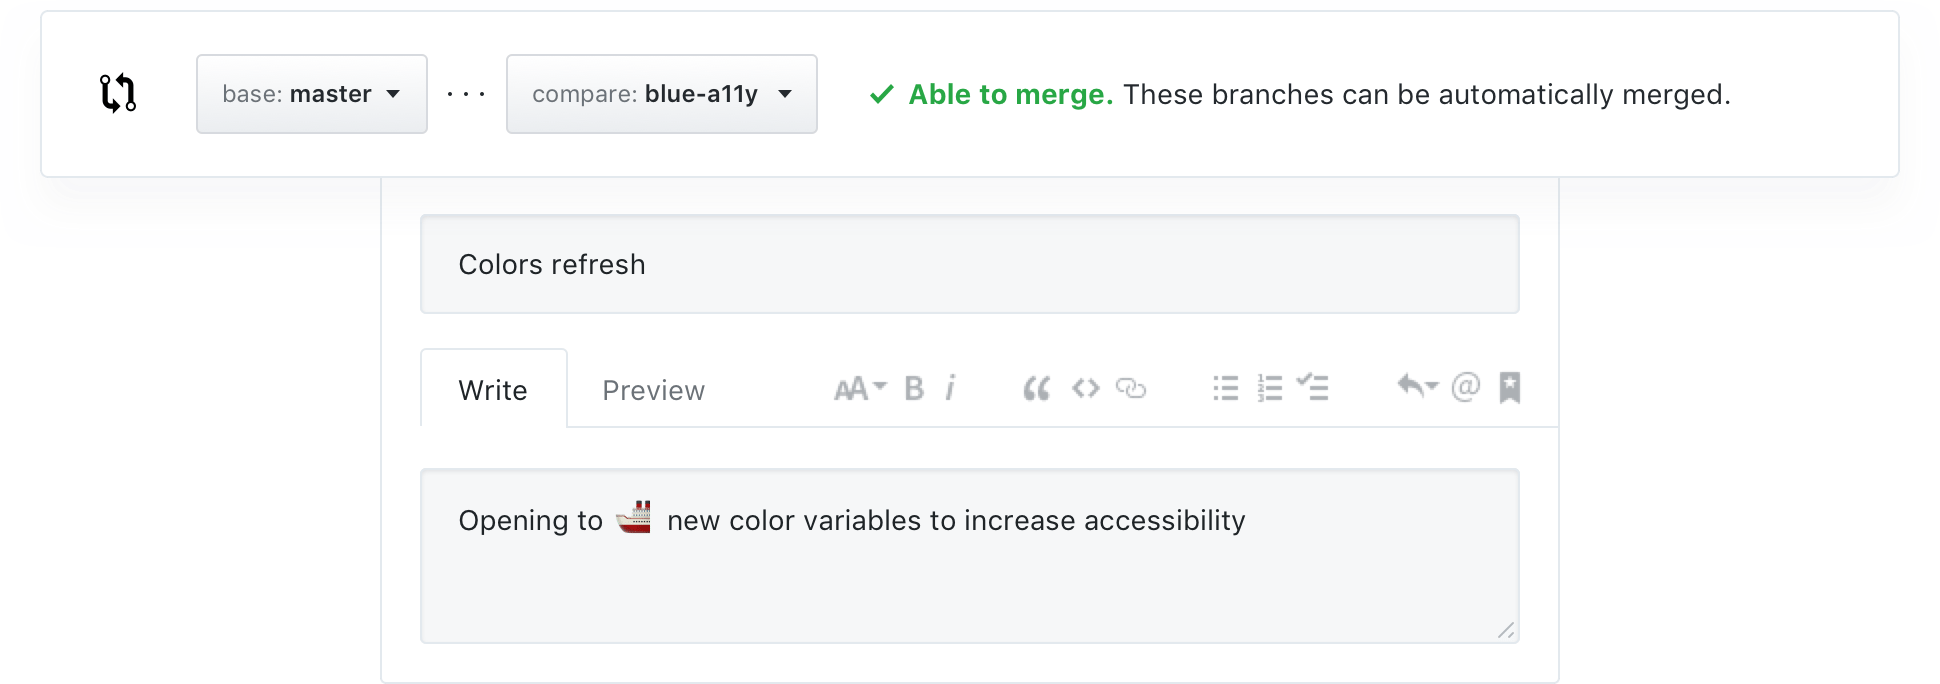 pull-request.png